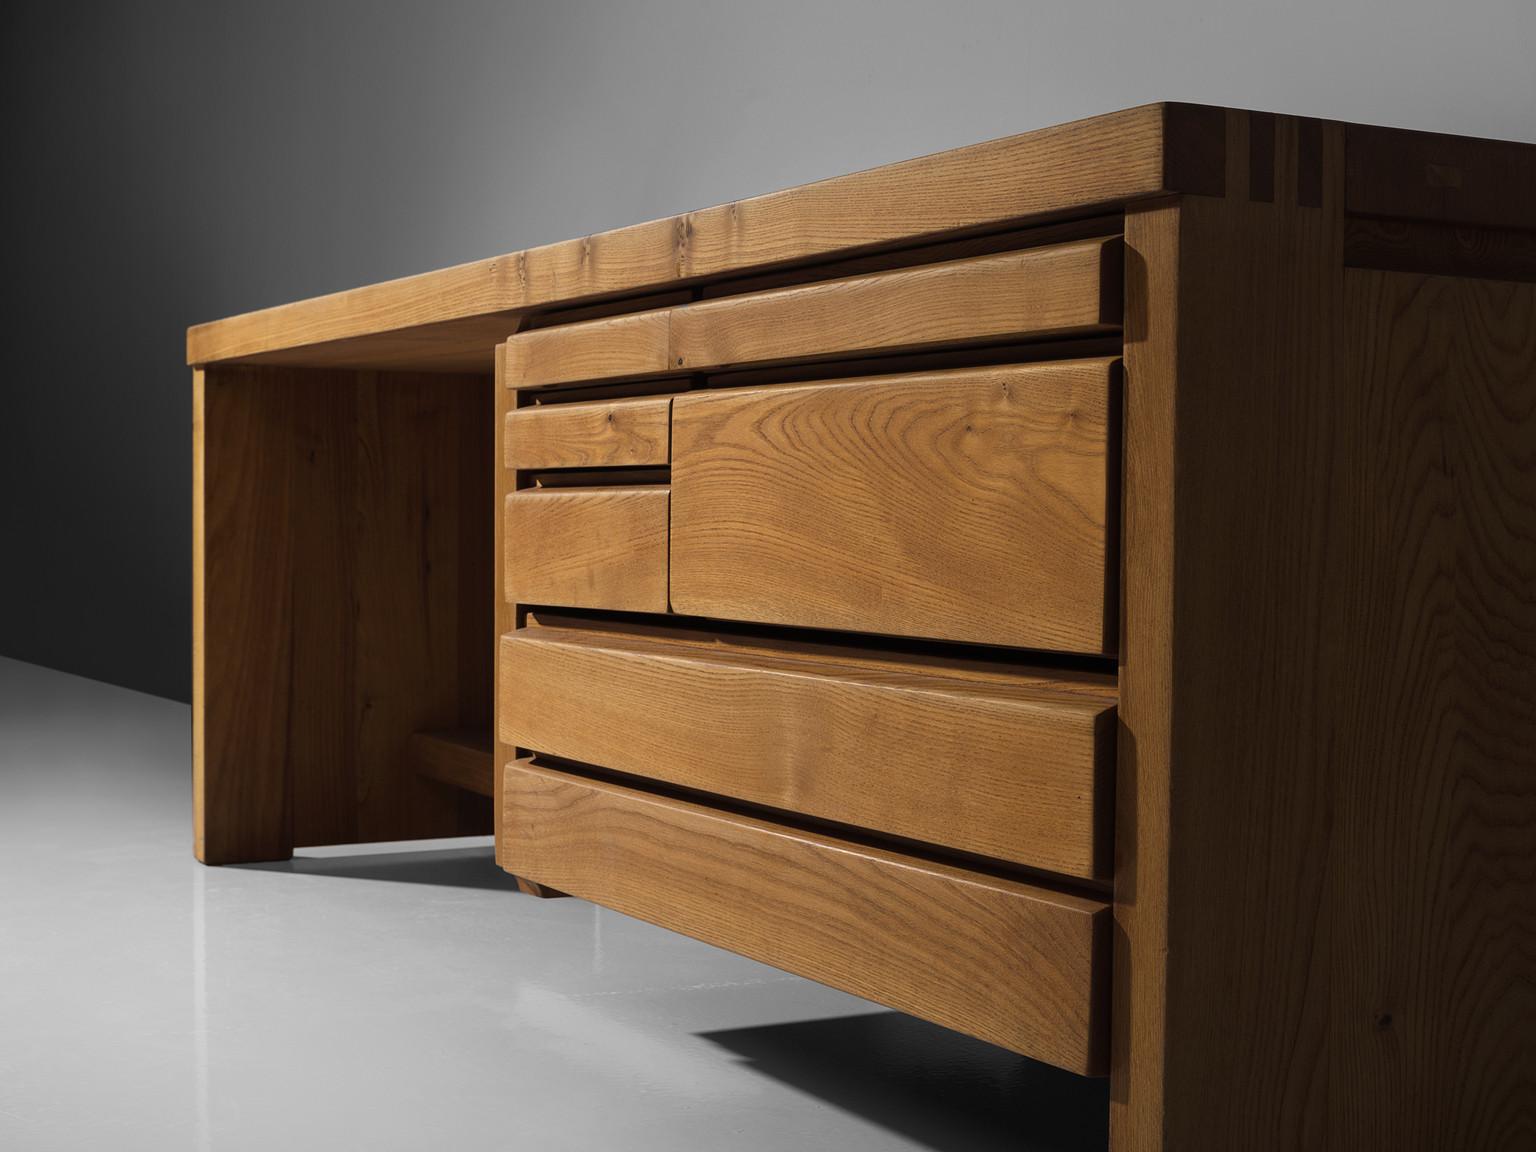 Pierre Chapo, dressing table R05A, elm, 1960s

This exquisitely crafted table with drawers combines a simplified yet complex design combined with nifty, solid construction details that characterize Chapo's work. The joints on the corner of this